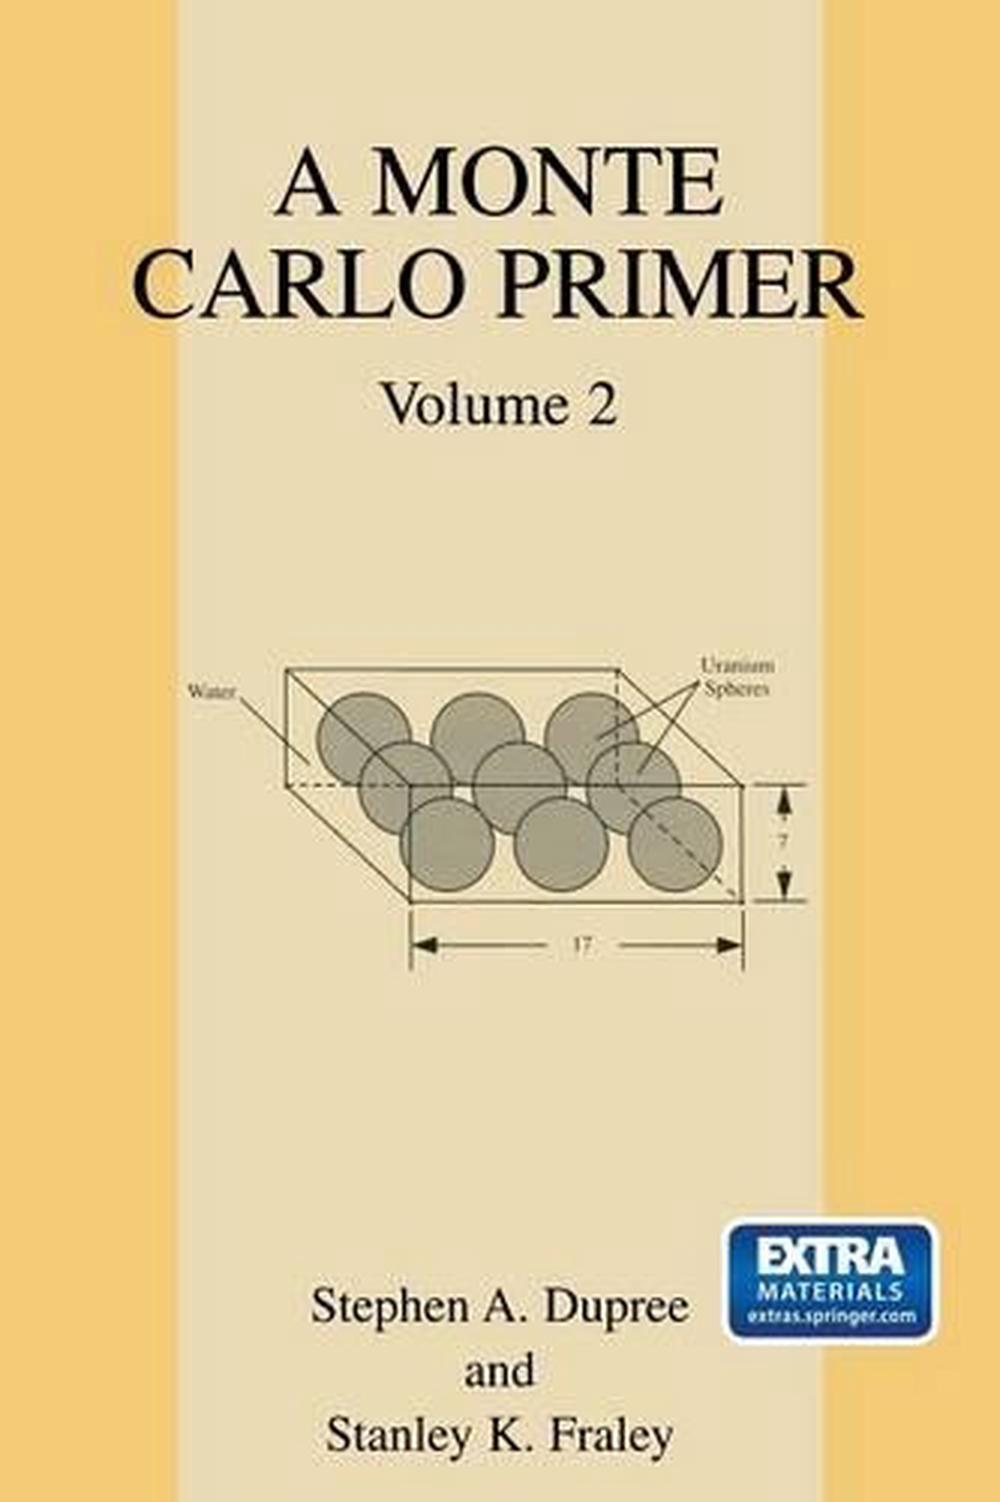 A Monte Carlo Primer, Volume 2 by Stephen A. Dupree (English) Hardcover